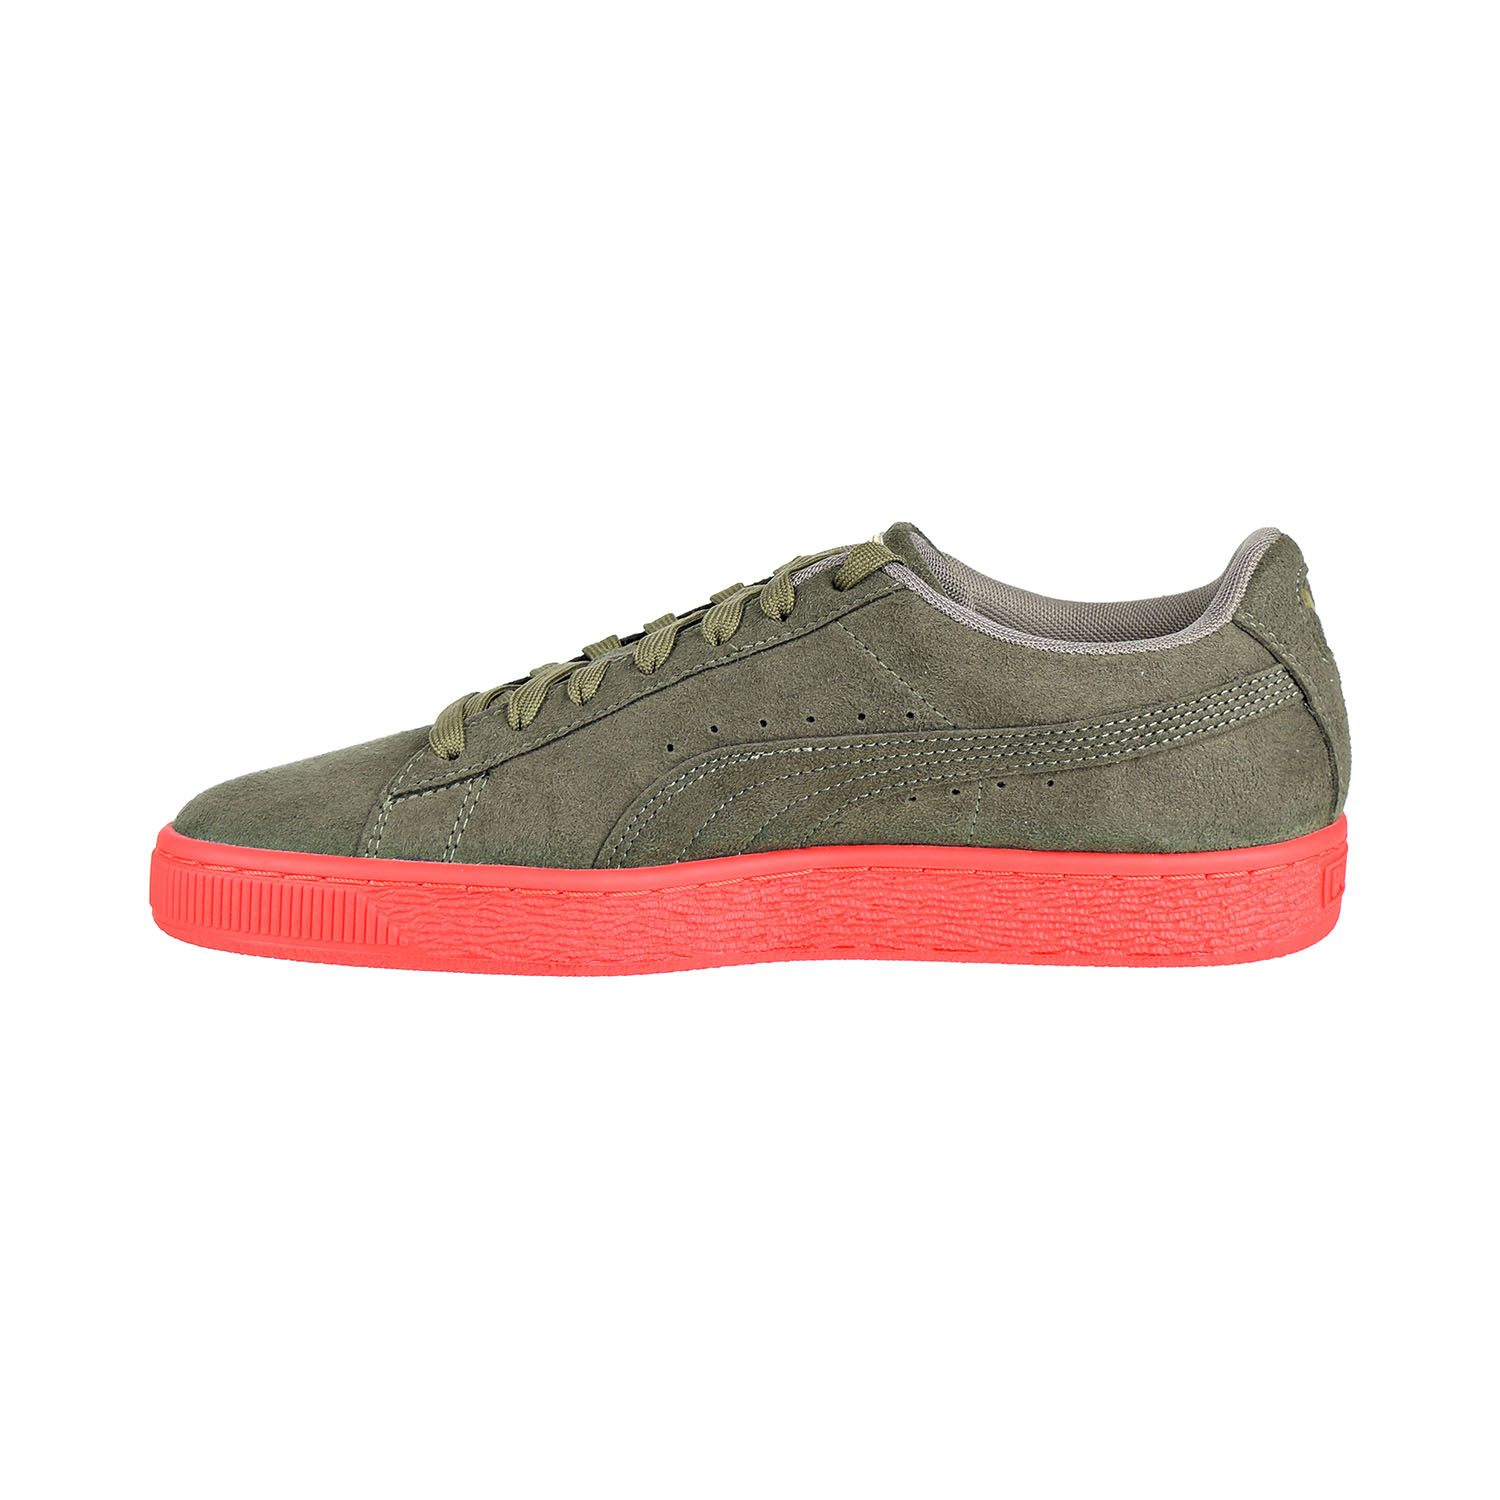 Puma Court Classic Dragon Patch Men's Shoes Burnt Olive/High Risk Red 368359-01 - image 4 of 6